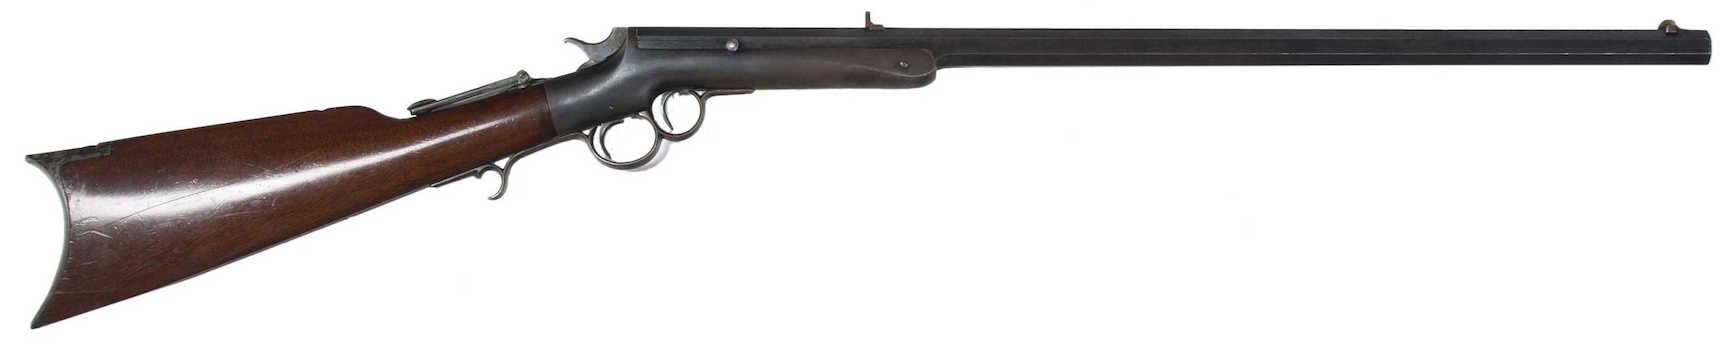 Frank Wesson Rifle